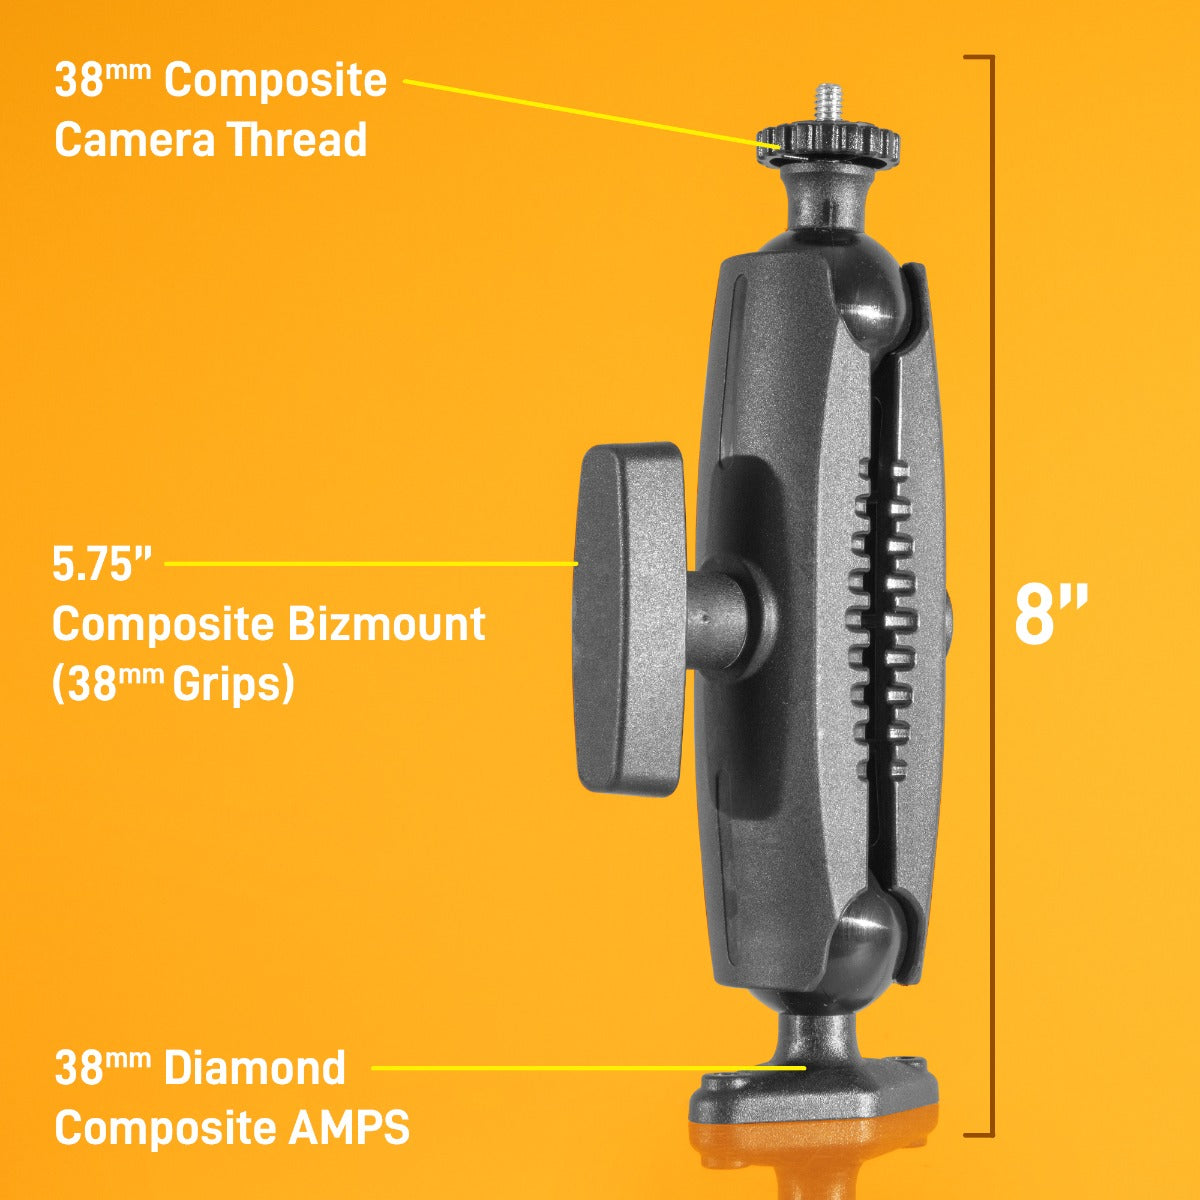 iBOLT™ 38mm / 1.5 inch Composite Diamond AMPS to ¼ 20” Camera Screw Mount